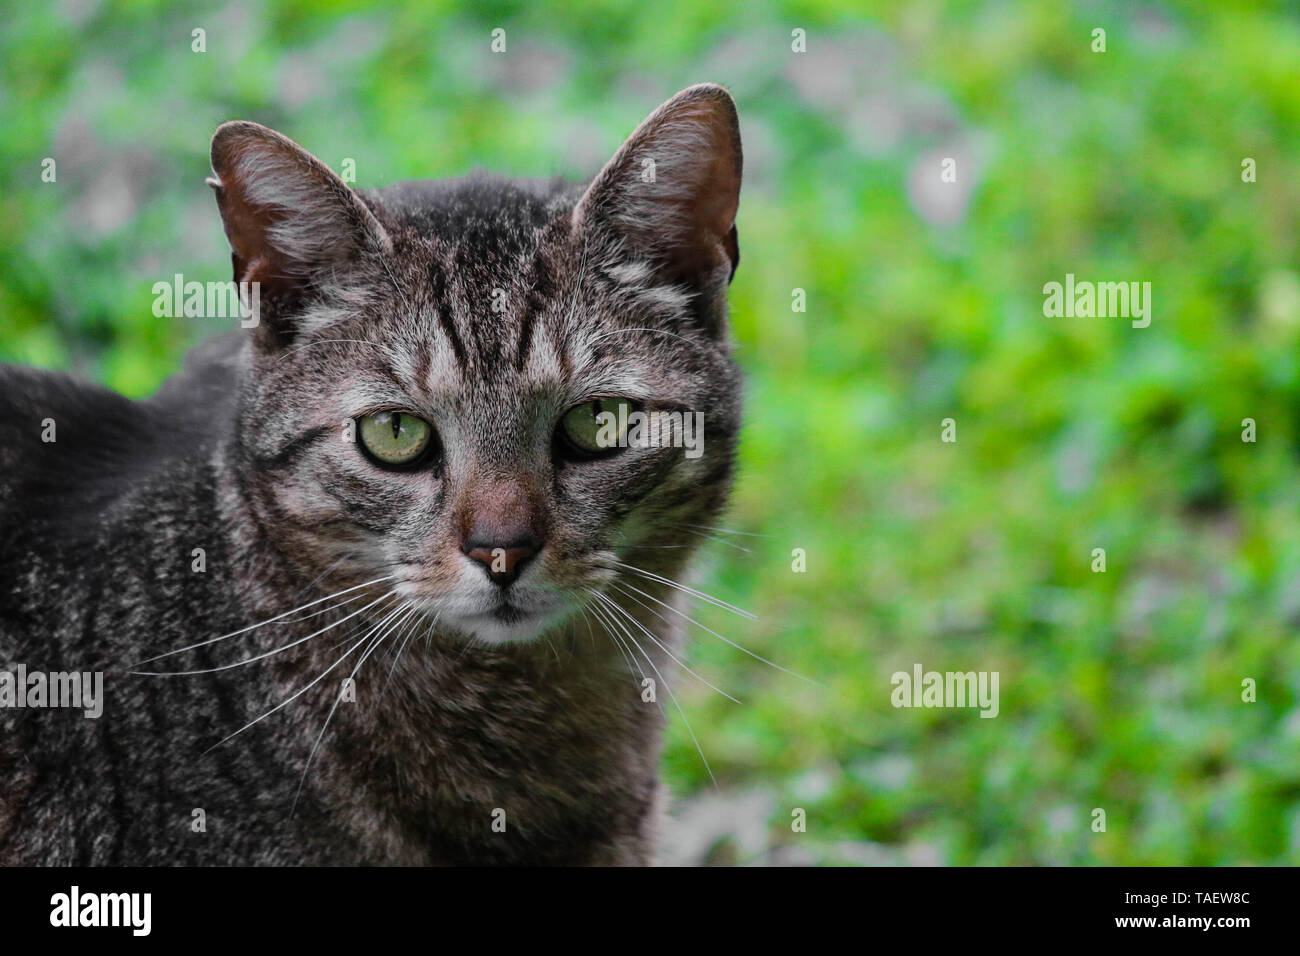 Guess The Animal High Resolution Stock Photography and Images - Alamy